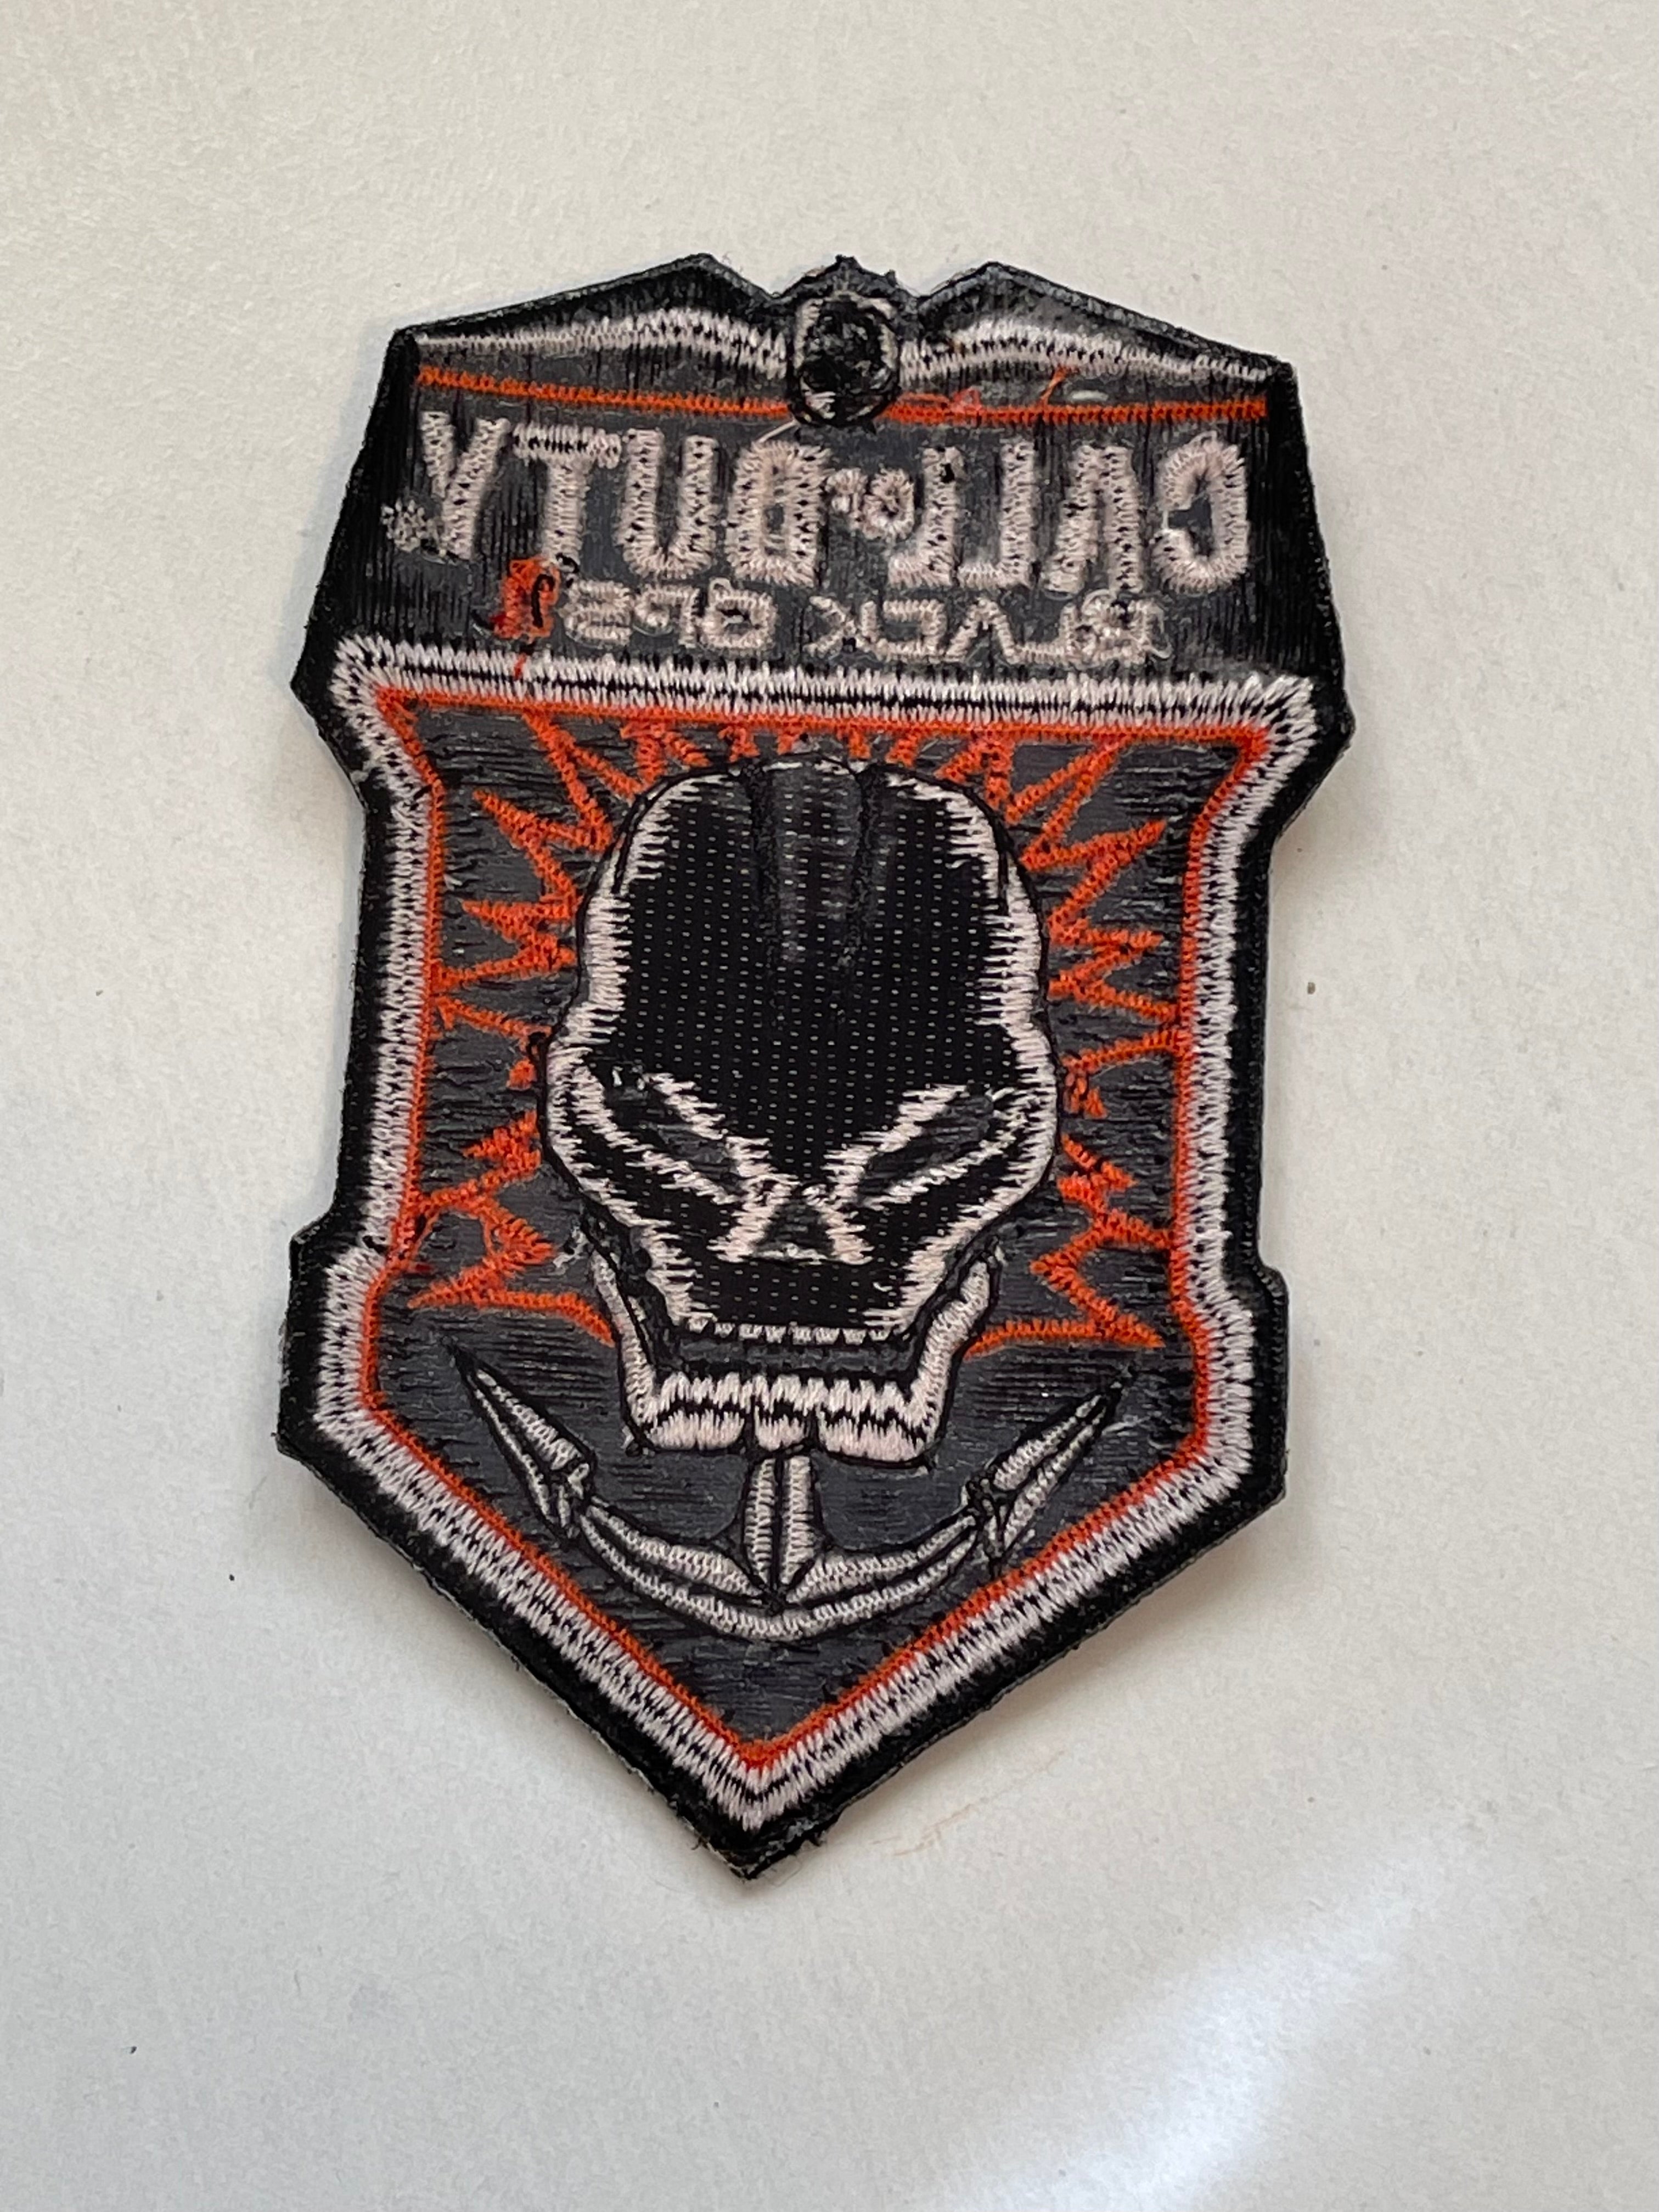 Call of Duty Black Ops patch